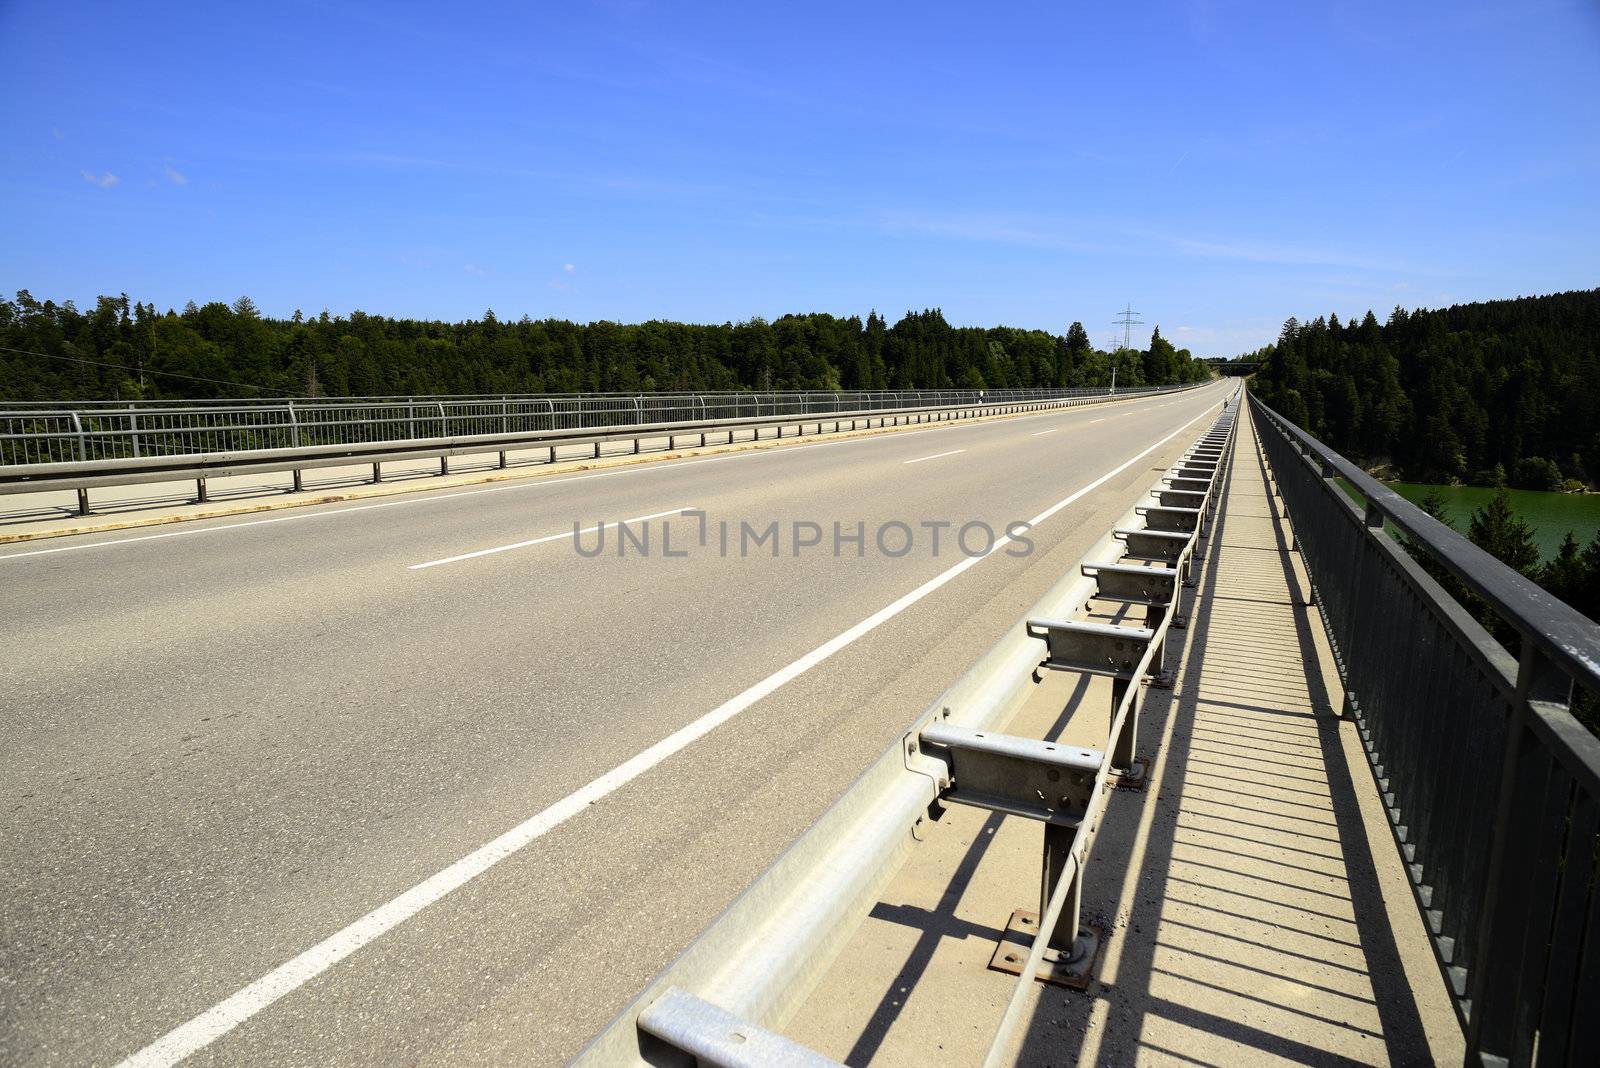 Concrete road bridge over the river called "Lech". Placed in Germany, Bavaria, Allgäu. There are also coniferous trees and blue sky, sunny weather.